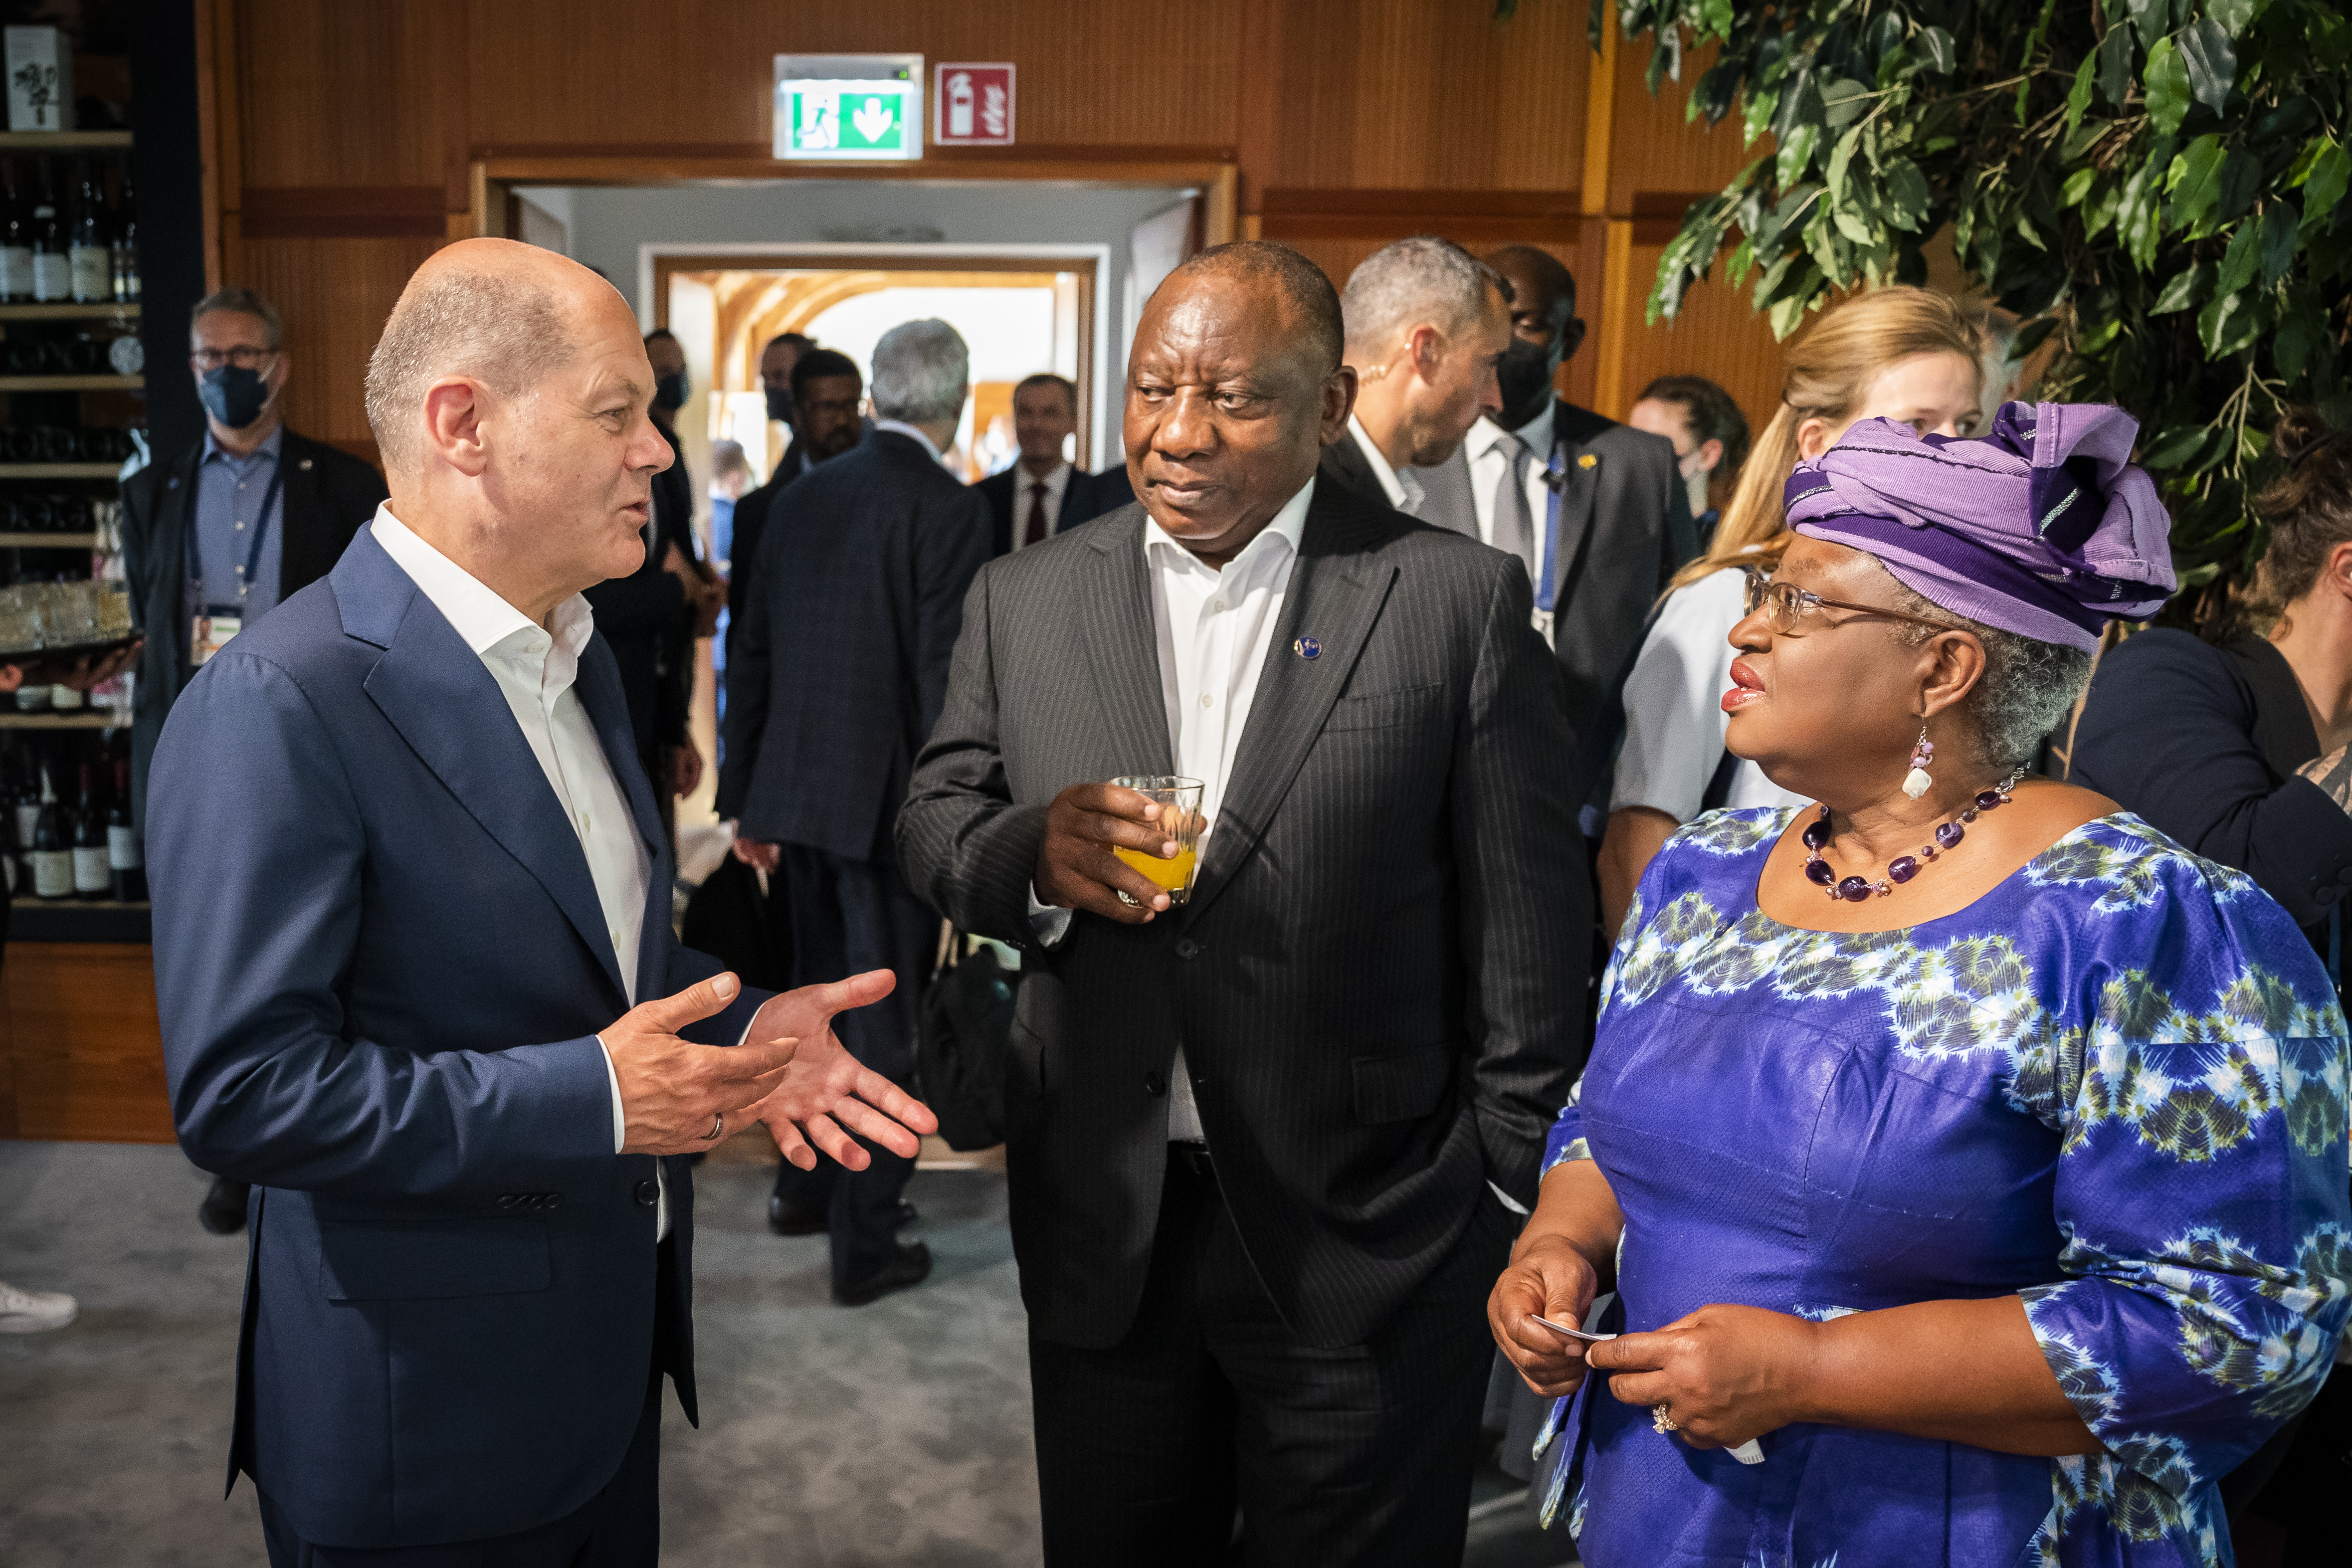 Federal Chancellor Olaf Scholz speaking with President Cyril Ramaphosa of South Africa and Ngozi Okonjo-Iweala, Director-General of the World Health Organization, before the start of the fifth working session.